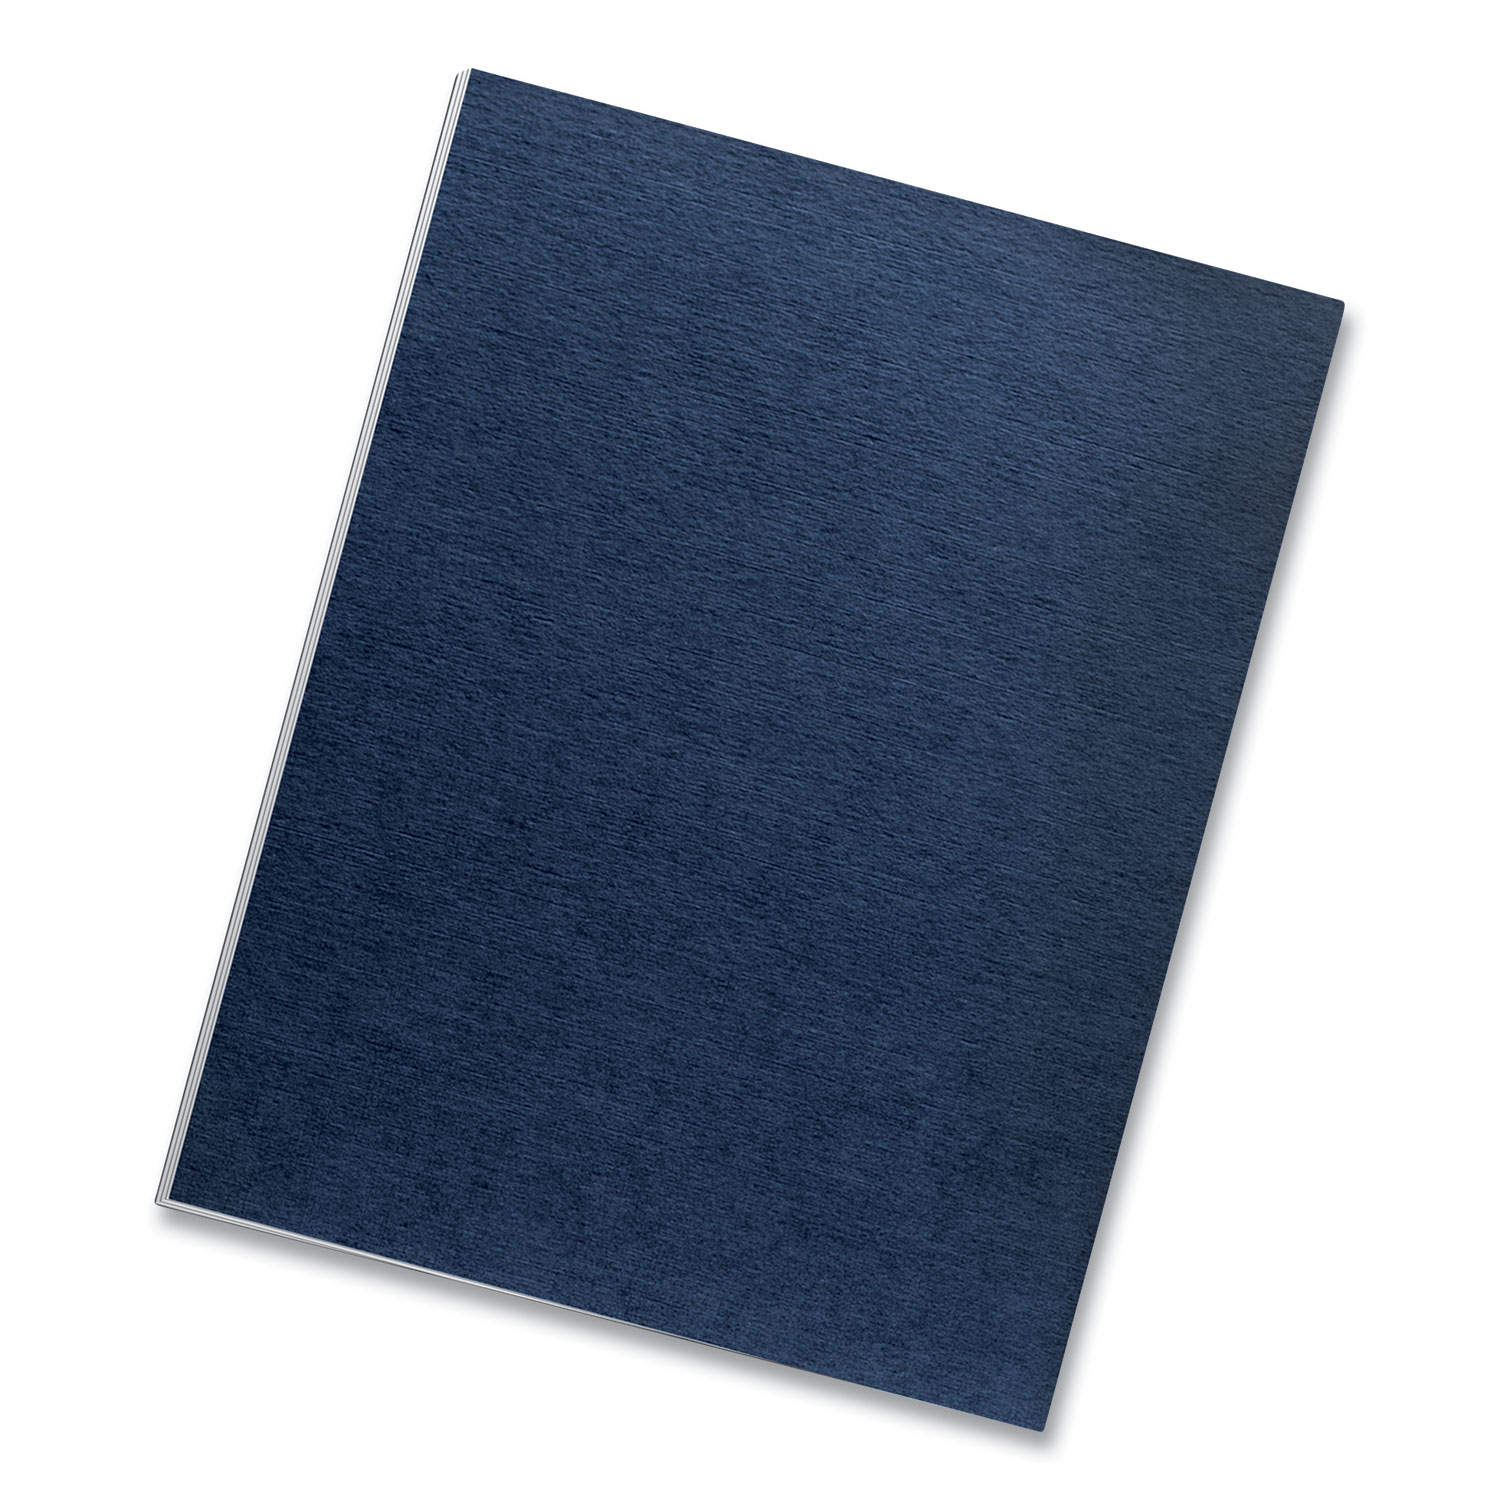 Coverbind Eco Linen Thermal Binding Covers